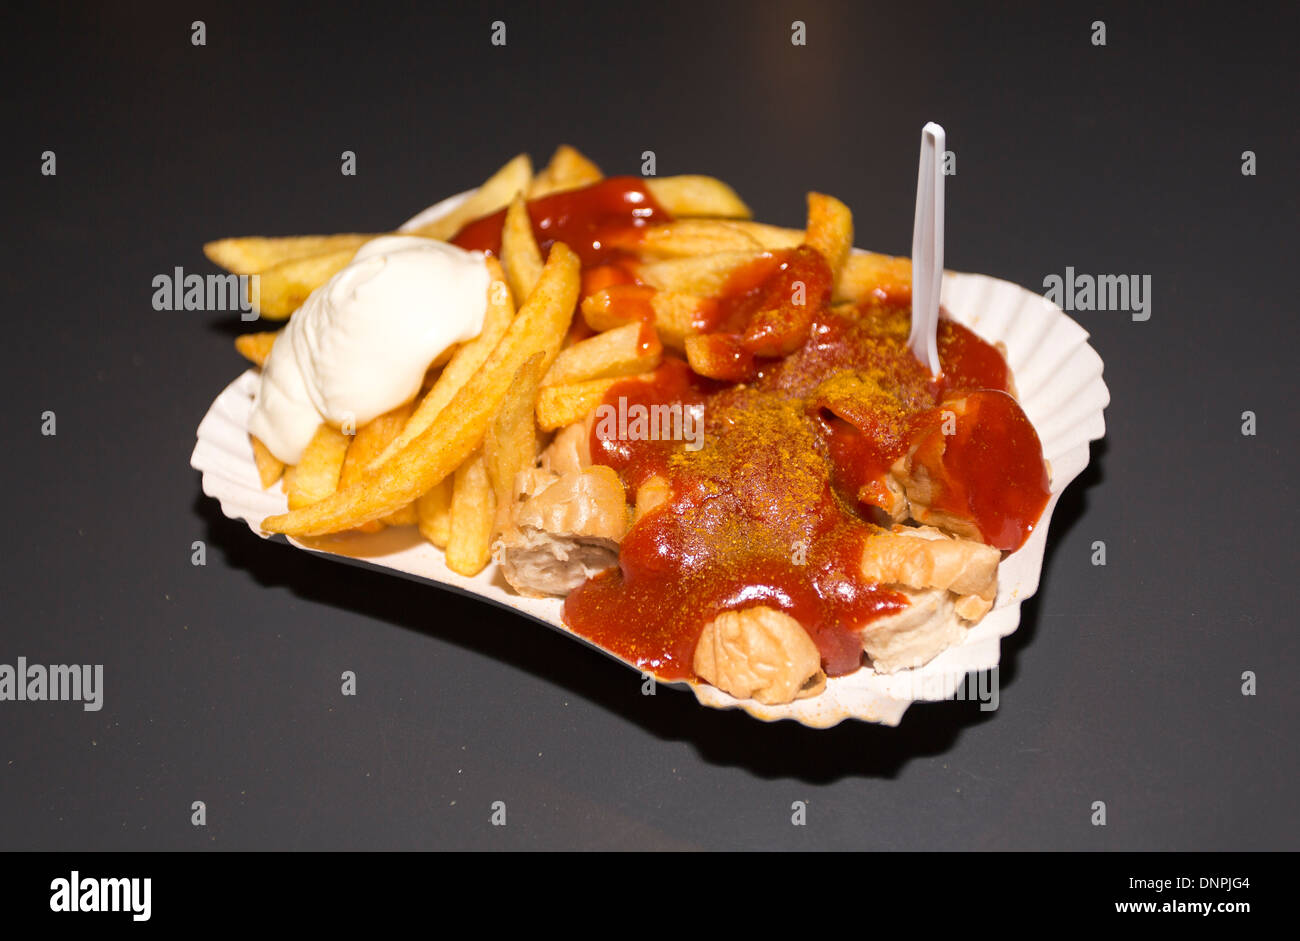 06/12/2013 Currywurst at Konnopke's Imbiss. Berlin, Germany Stock Photo